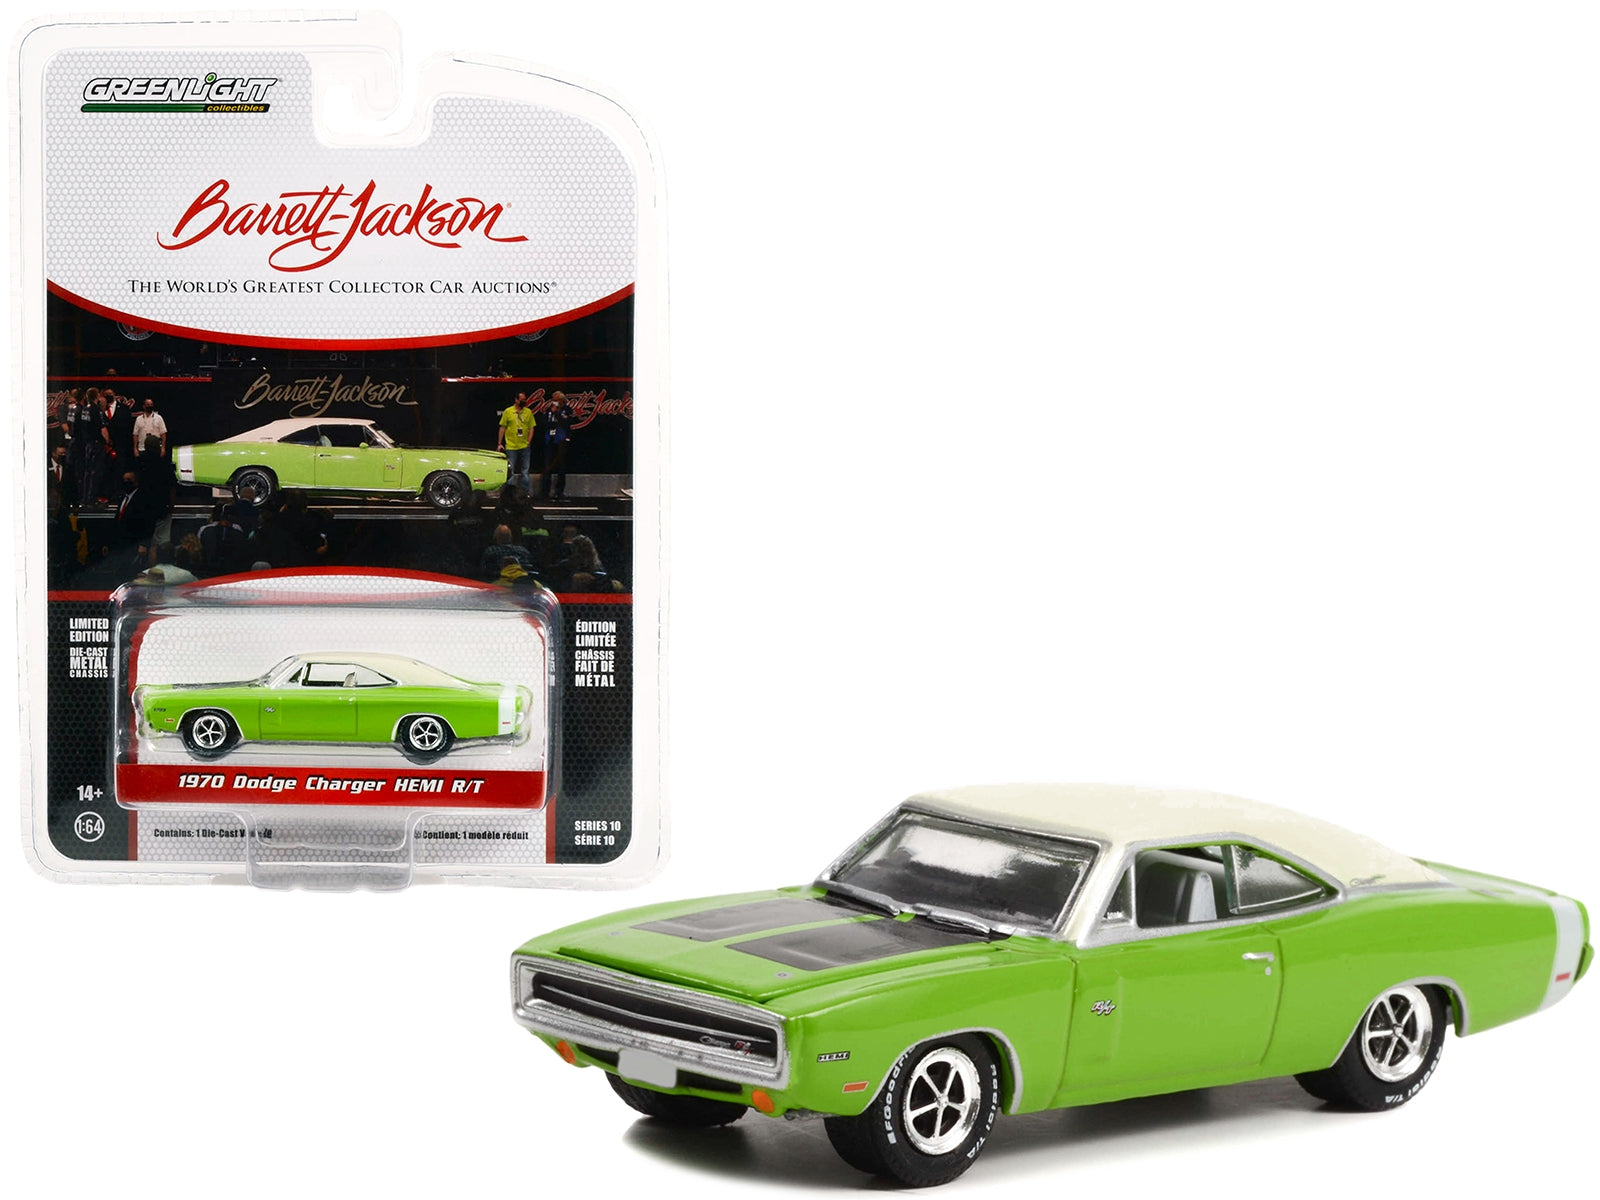 1970 Dodge Charger HEMI R/T Sublime Green with White Roof and White Tail Stripe (Lot #777) Barrett-Jackson 'Scottsdale Edition' Series 10 1/64 Diecast Model Car by Greenlight